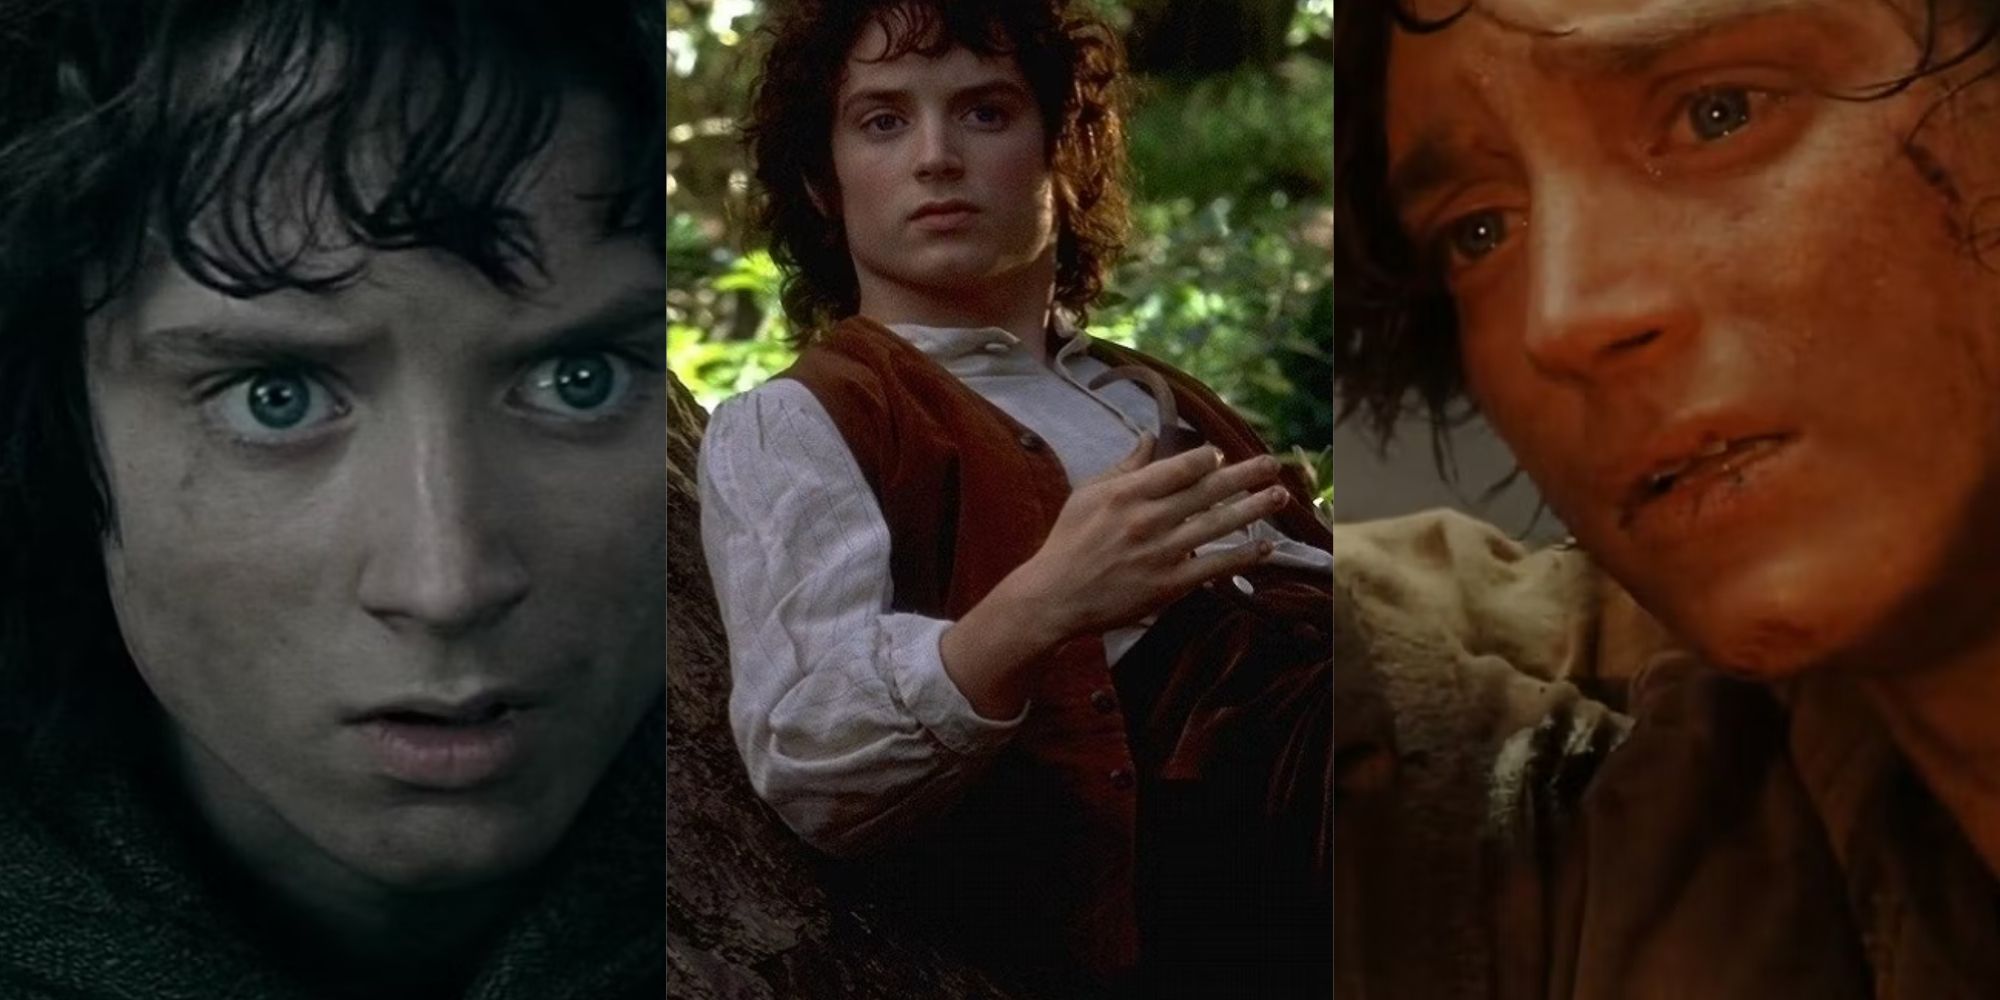 A-split-image-of-Frodo-from-the-Lord-of-the-Rings-movies-1